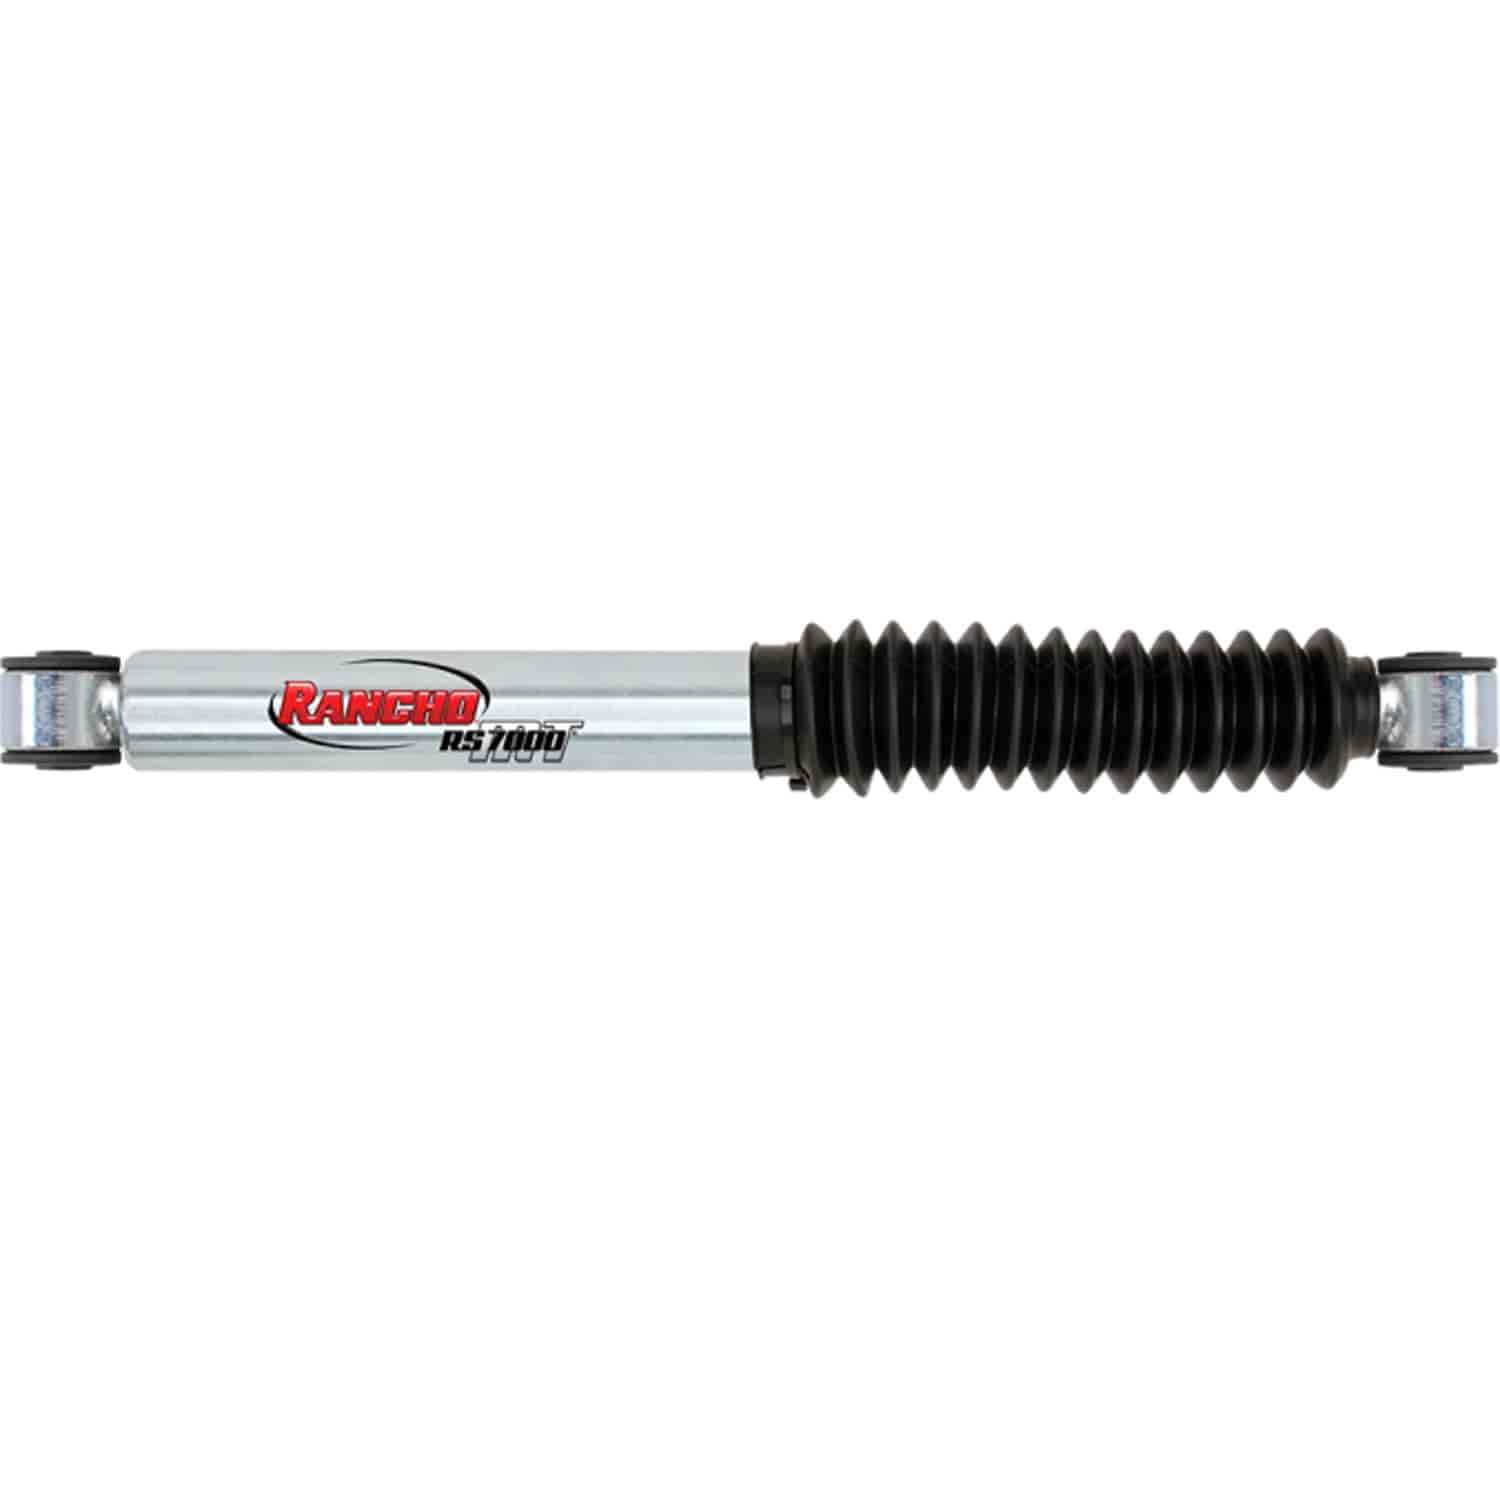 RS7000MT Front Strut Fits GM mid and full size Pickups and SUVs